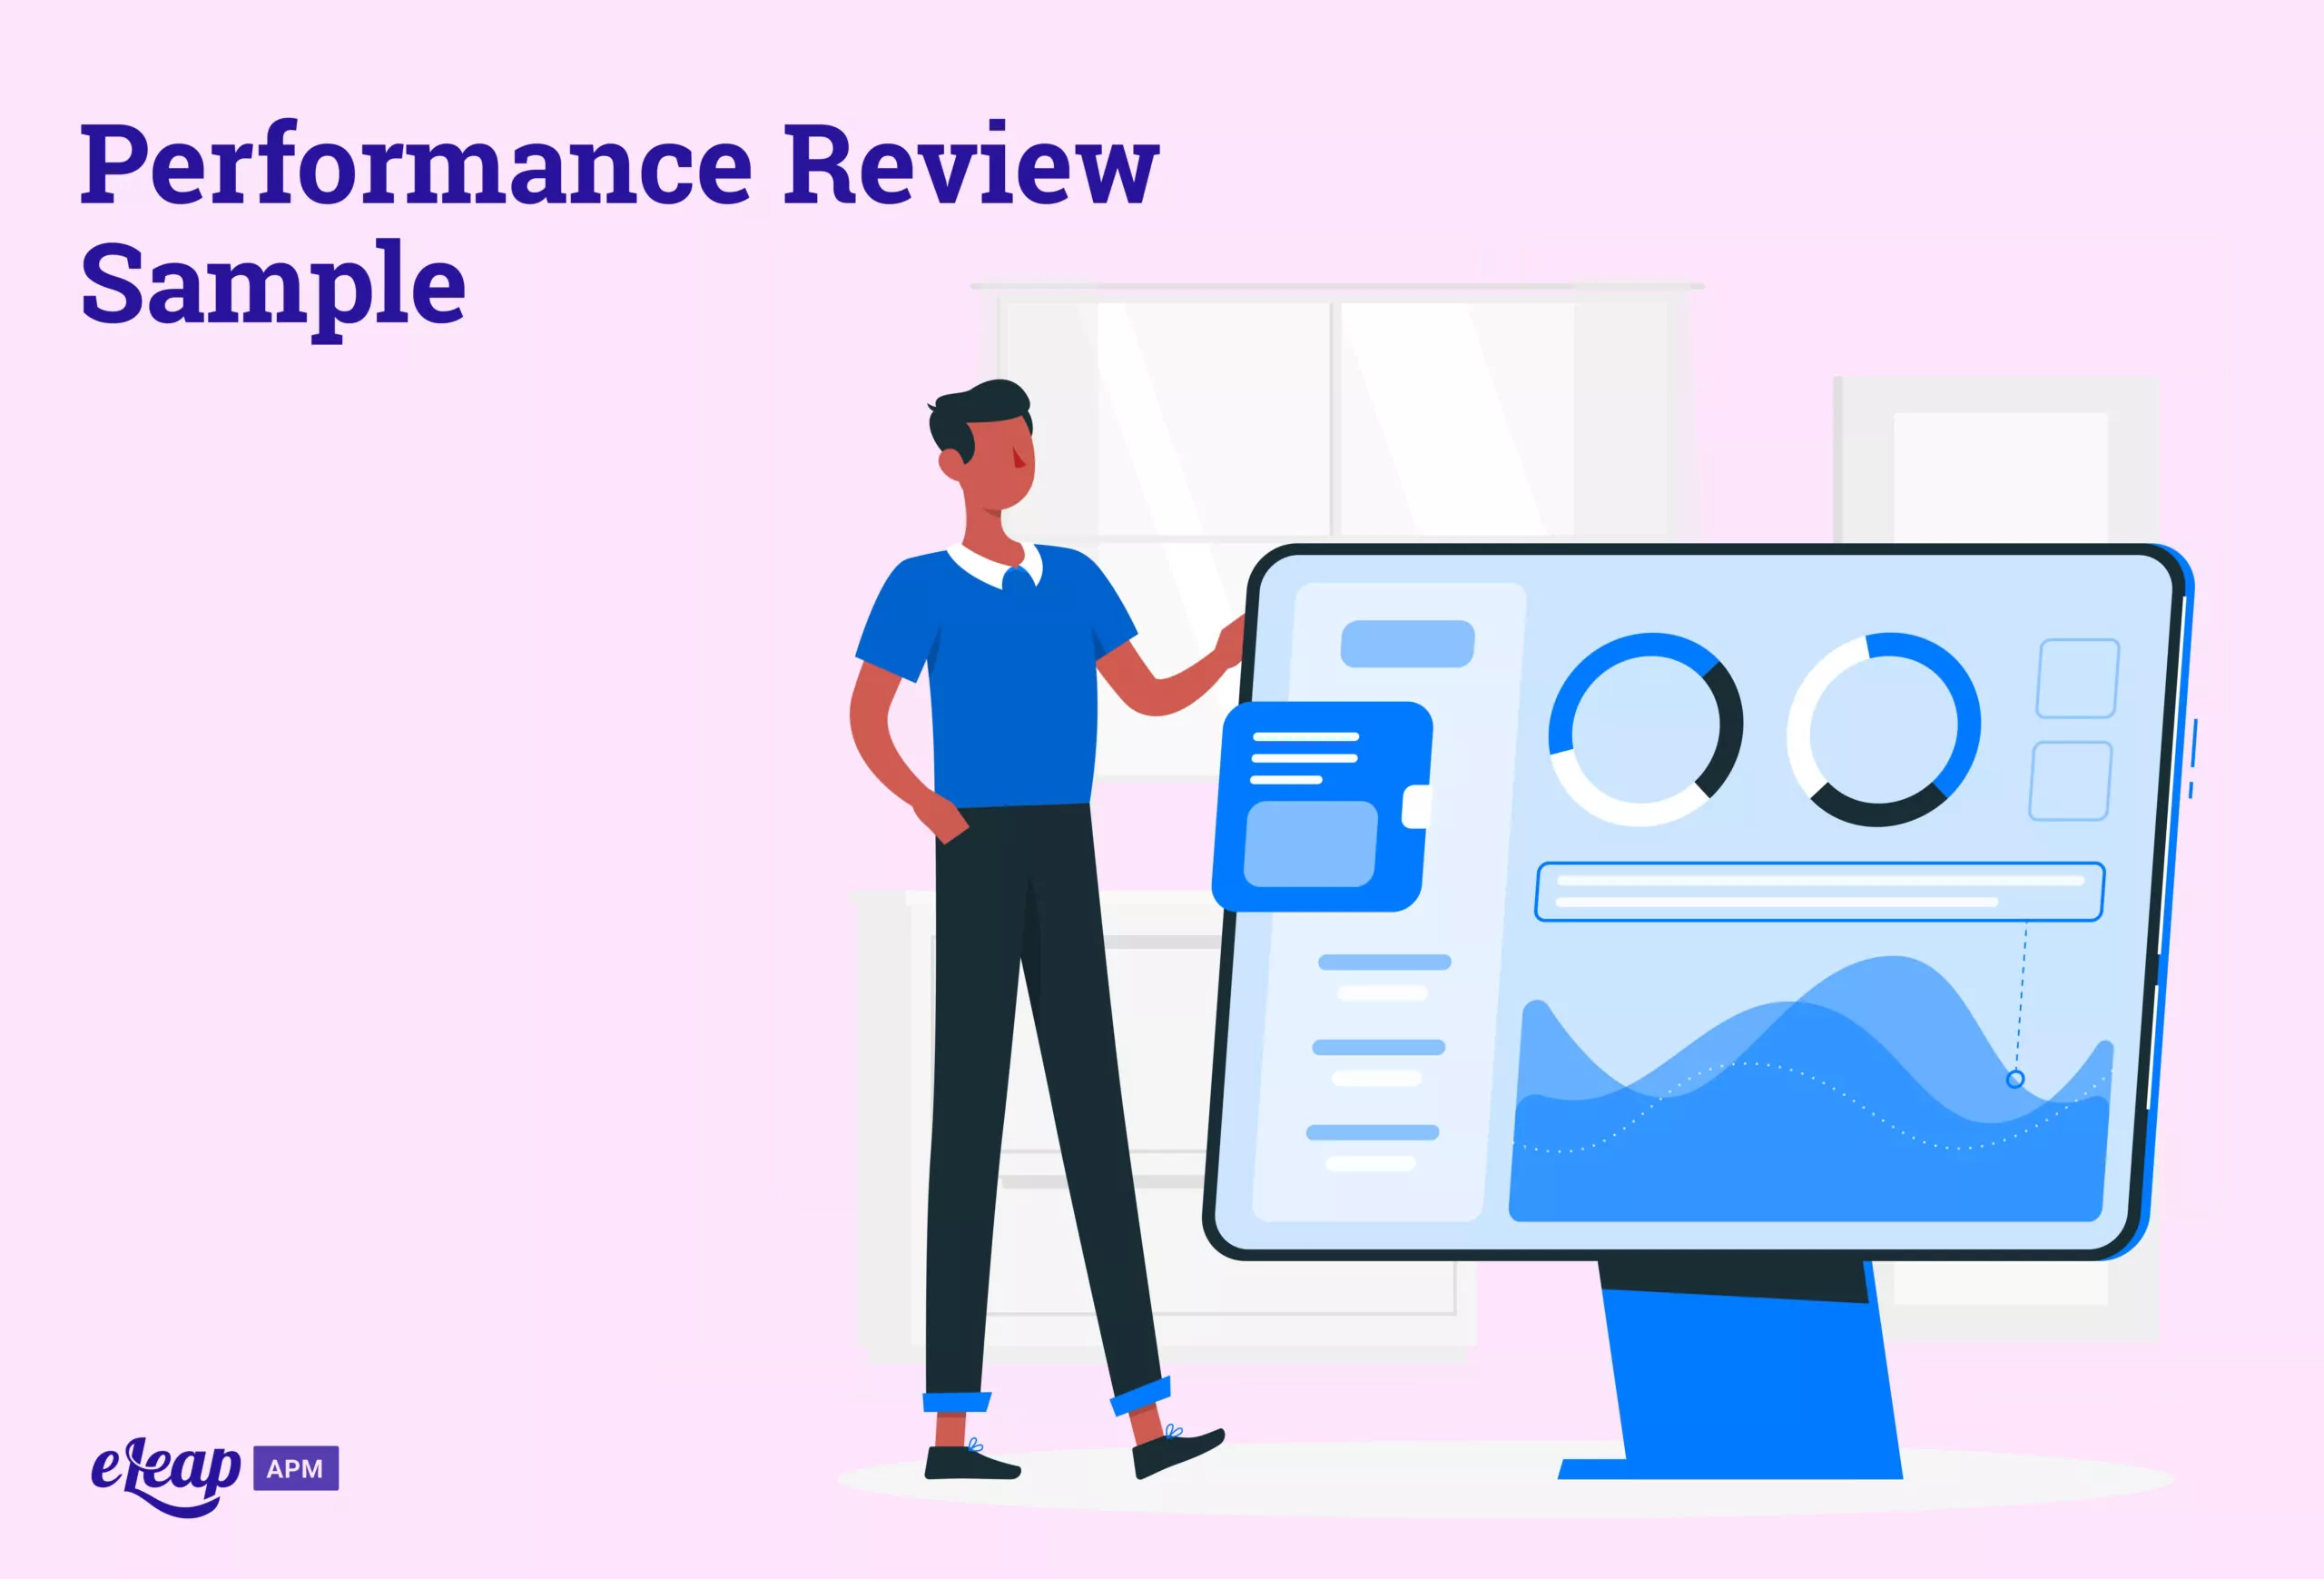 Performance Review Sample